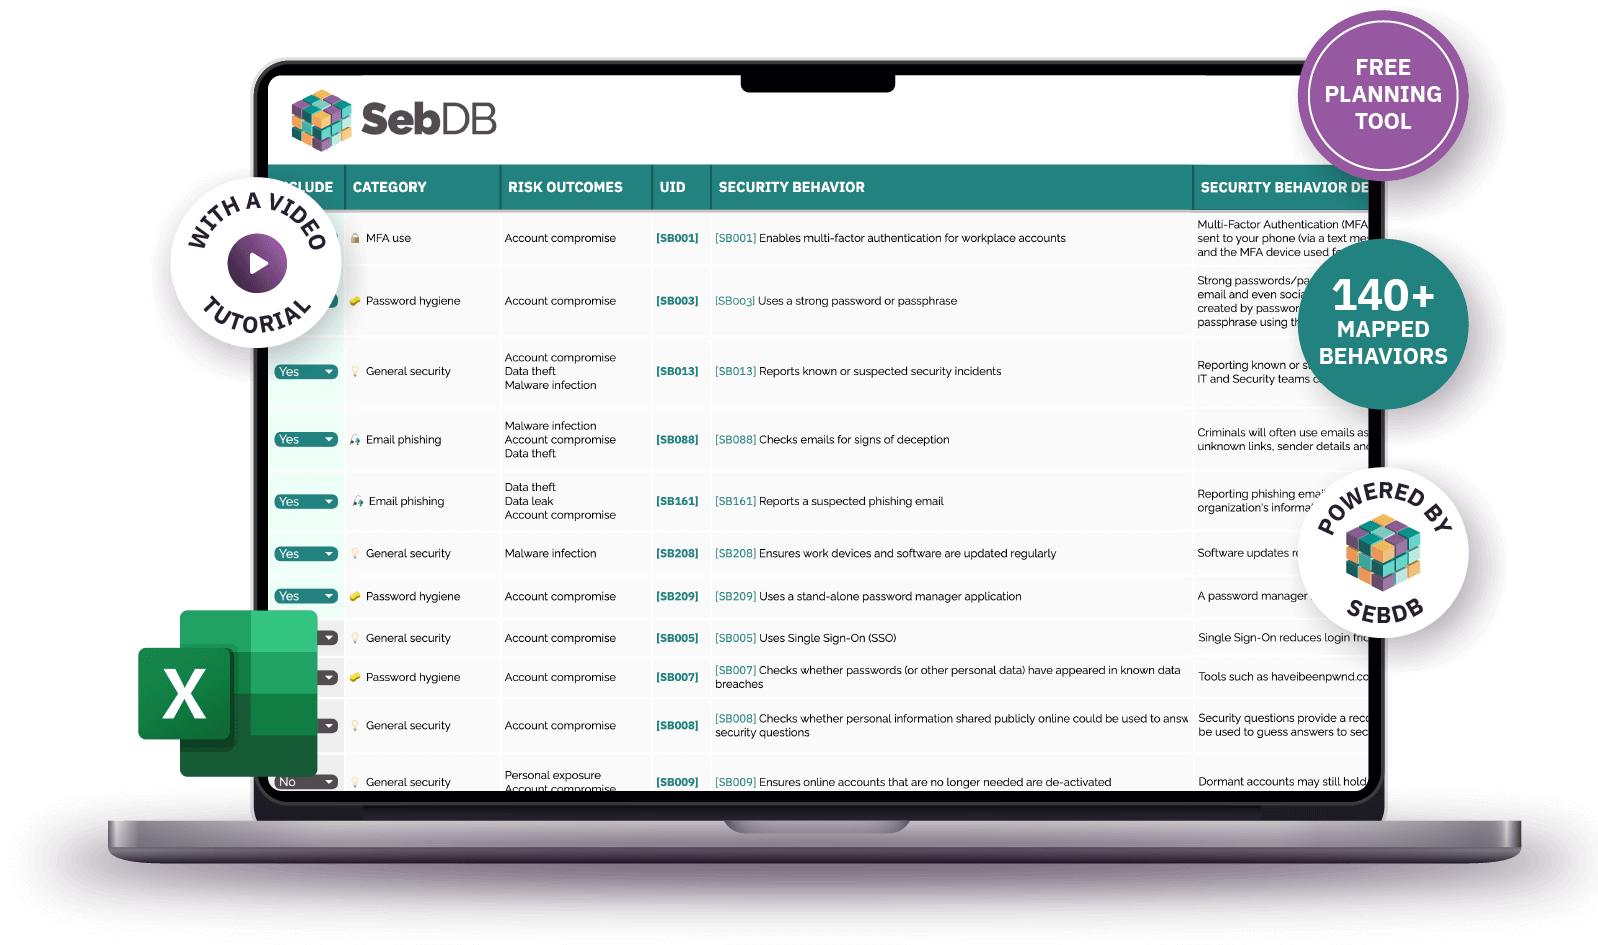 Cybersecurity planning tool CybSafe